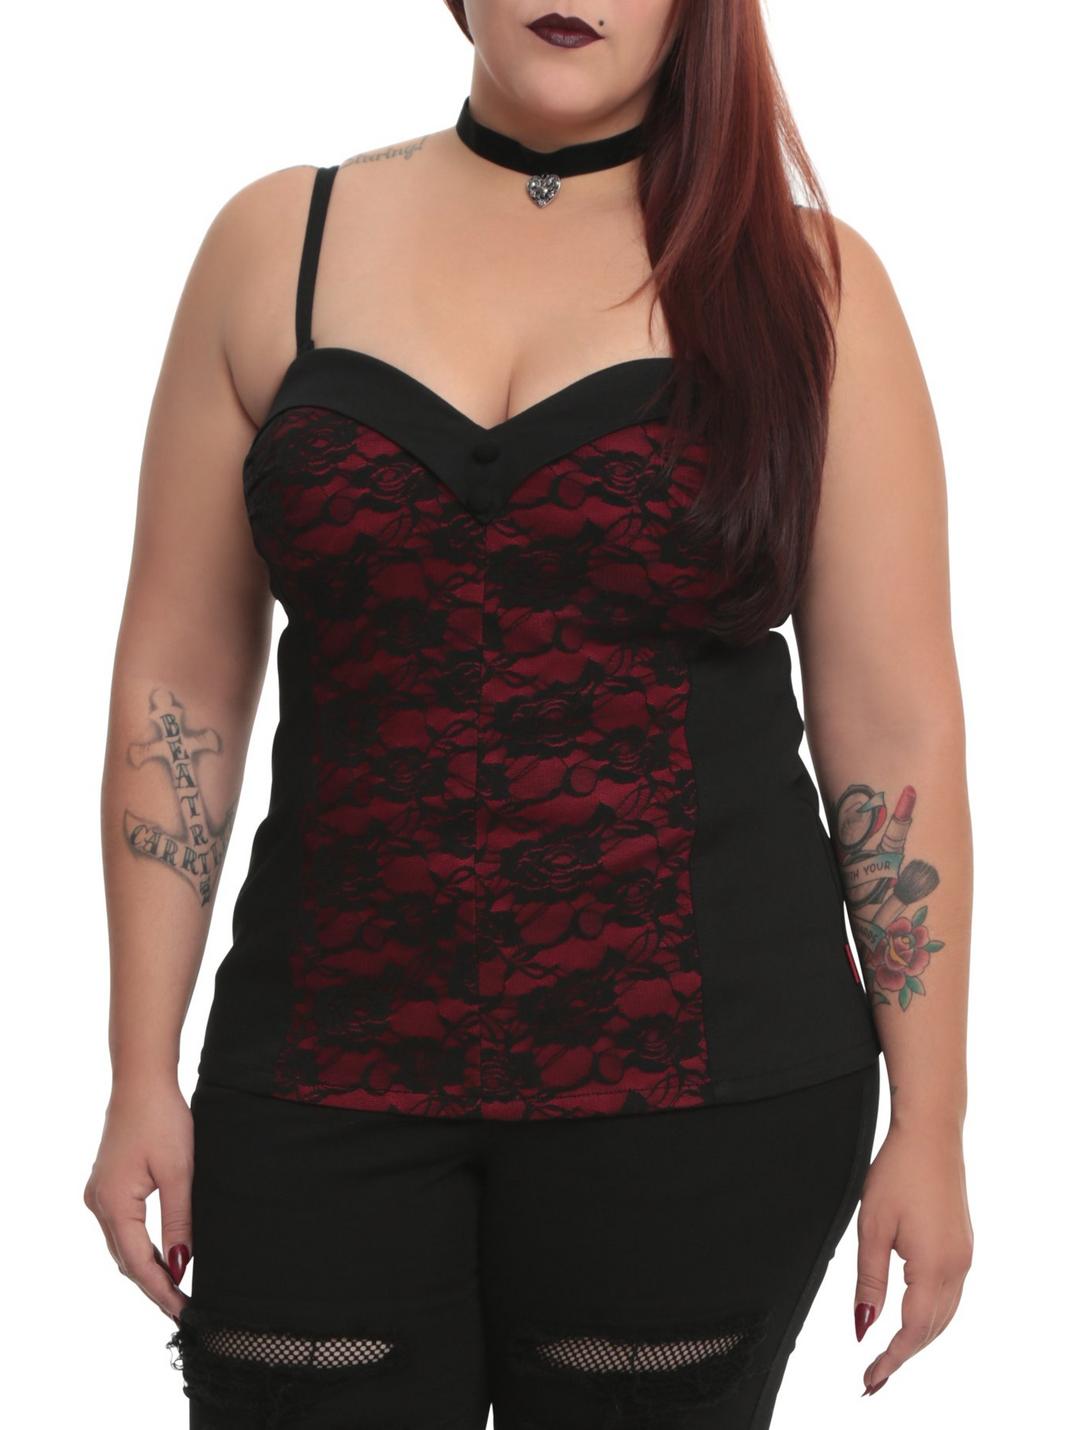 Tripp Black And Red Lace Corset Plus Size, RED, hi-res